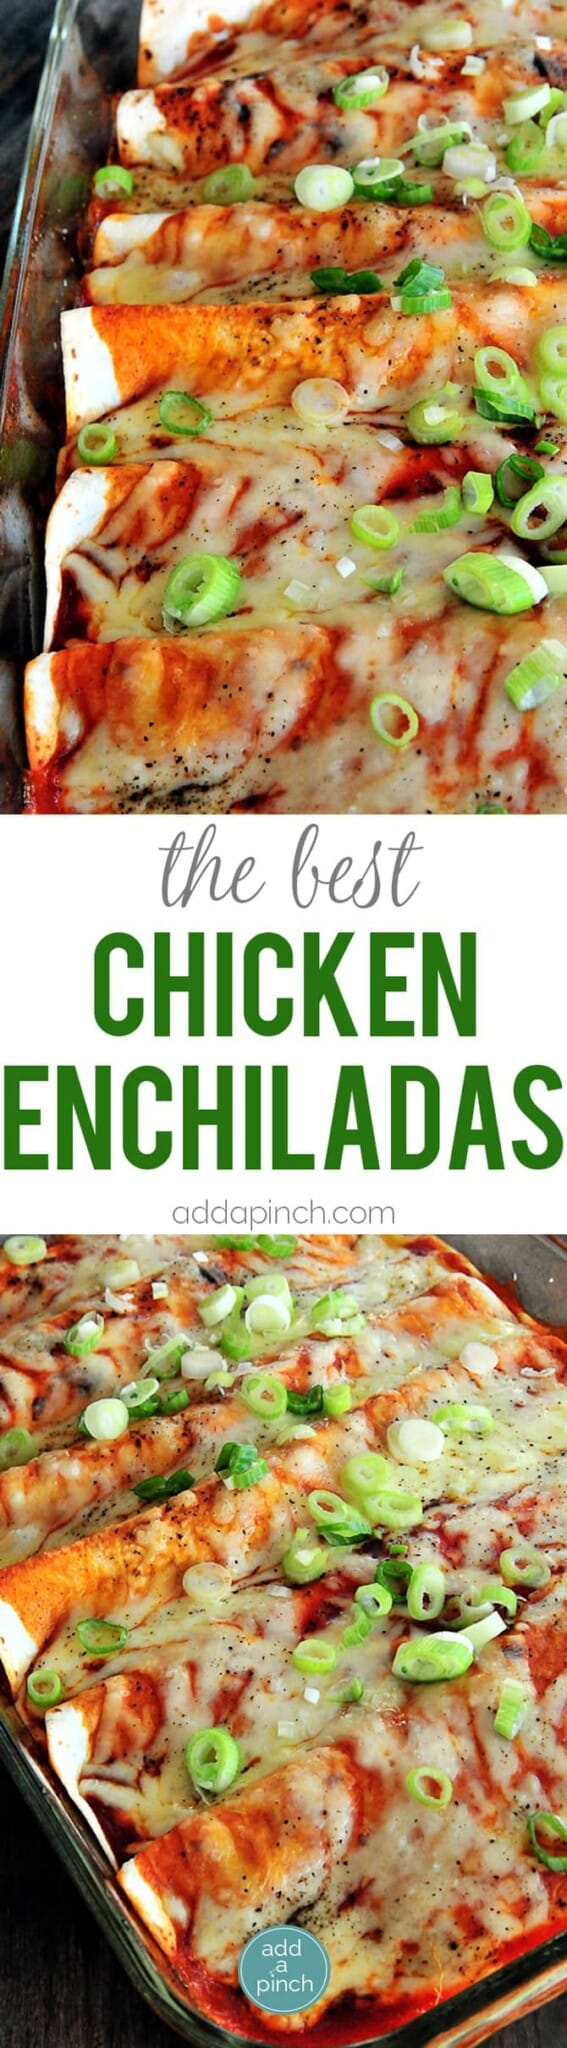 Chicken Enchiladas Recipe - Chicken Enchiladas make a perfect weeknight meal! Seriously the BEST chicken enchilada recipe and one the whole family will love! It will become a favorite! // addapinch.com